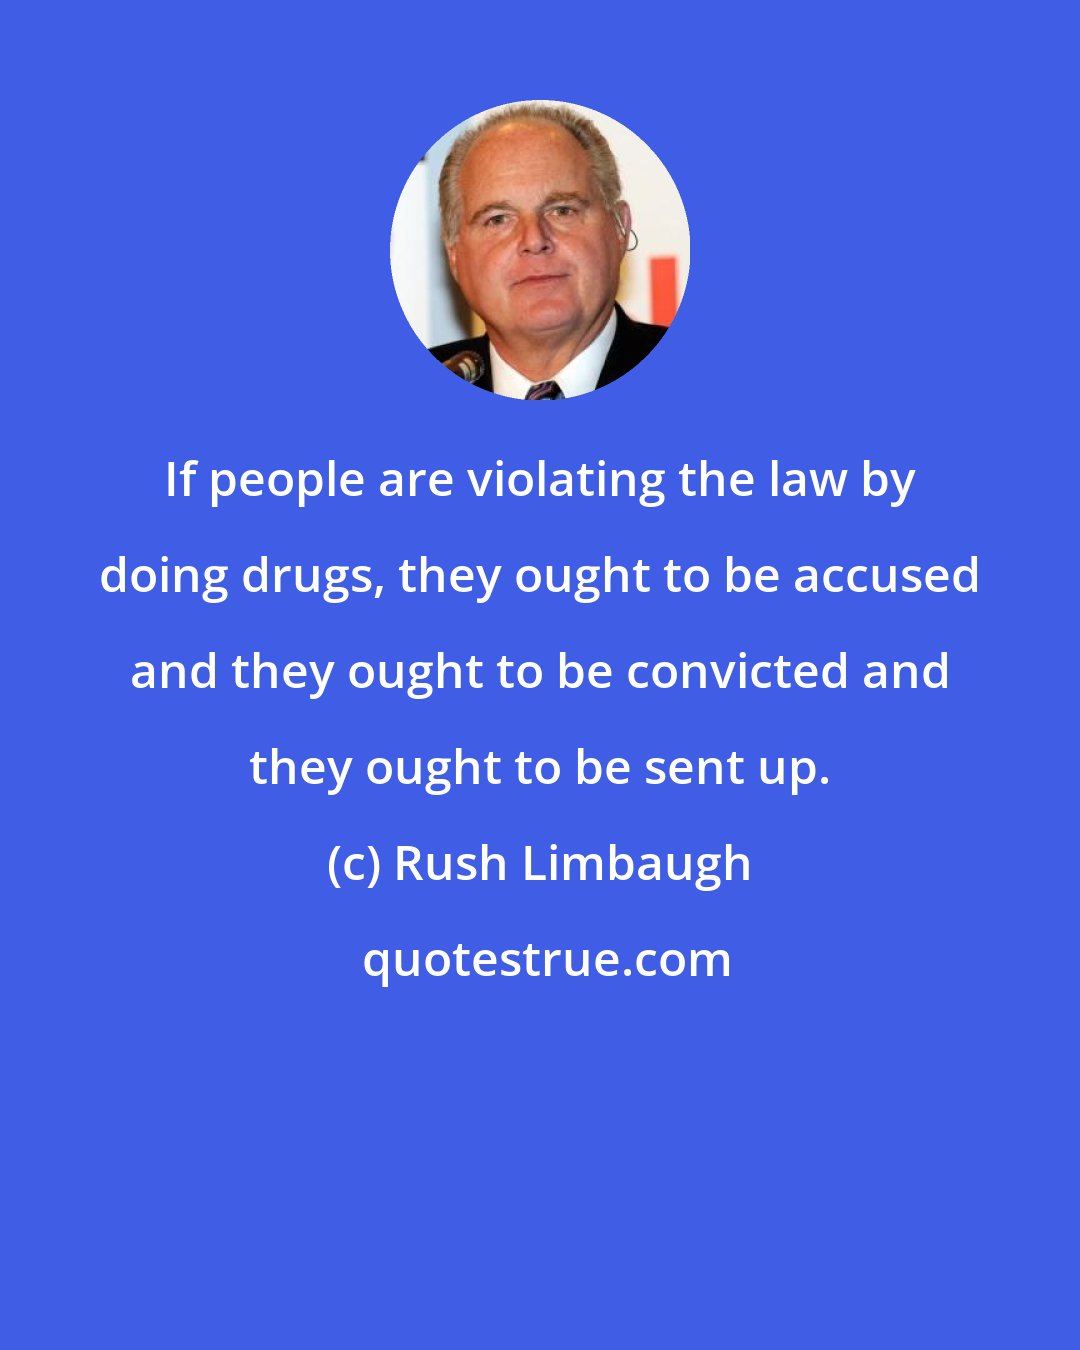 Rush Limbaugh: If people are violating the law by doing drugs, they ought to be accused and they ought to be convicted and they ought to be sent up.